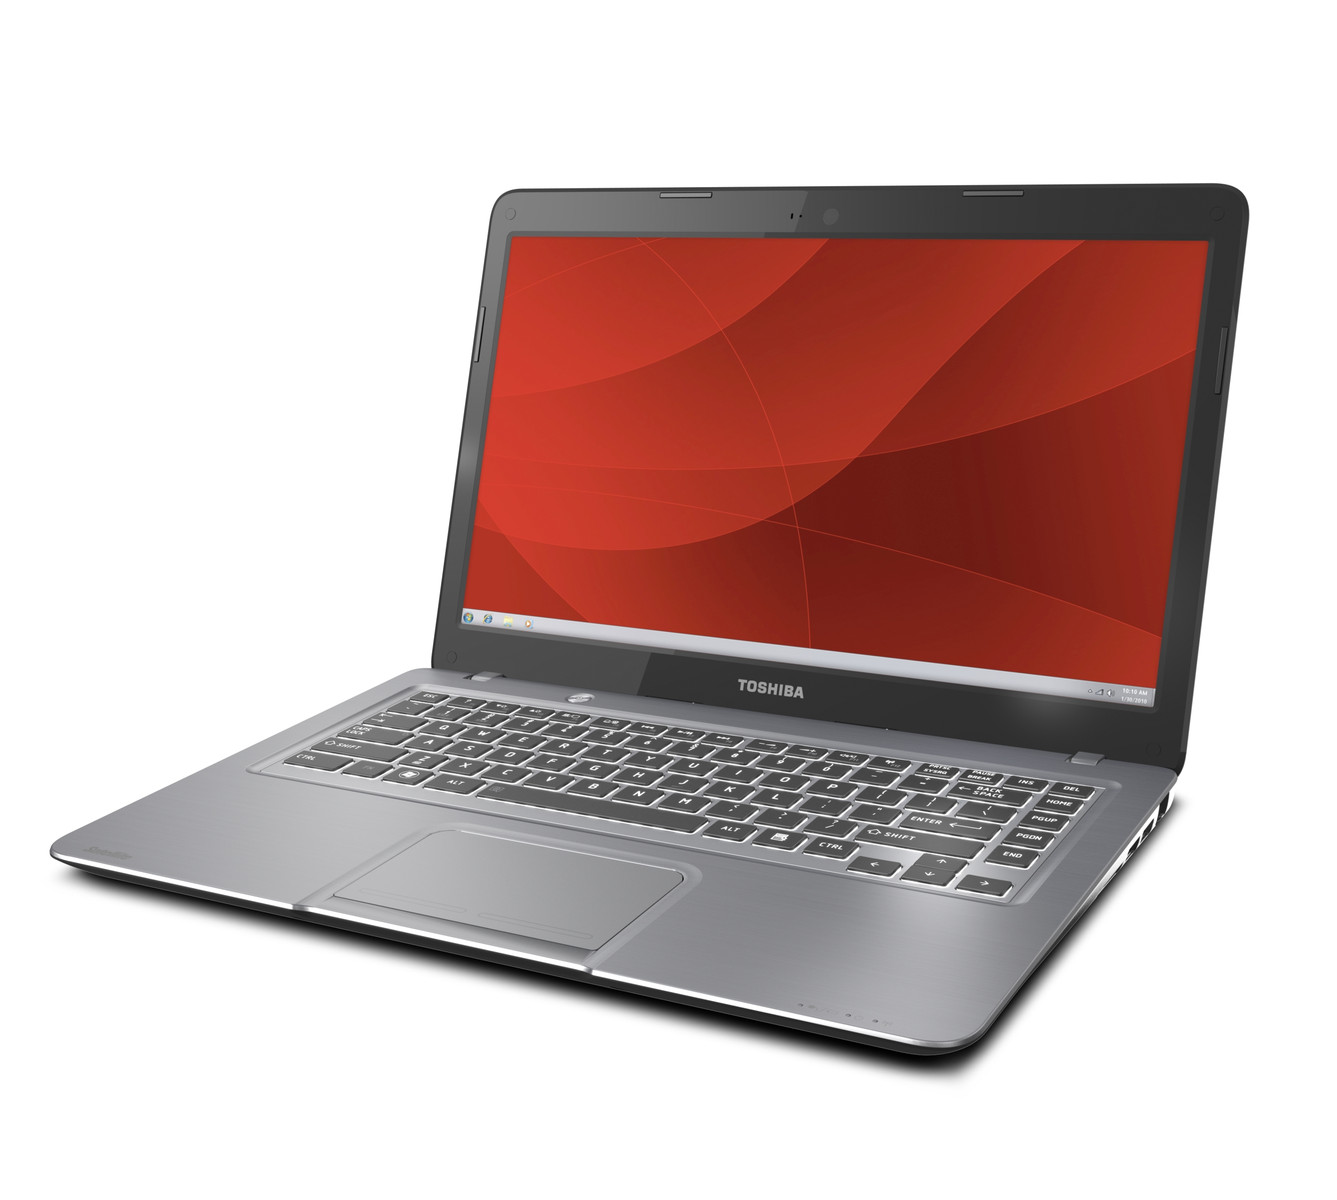 Toshiba unveils 21:9 Satellite Ultrabook and a revamped Portege 